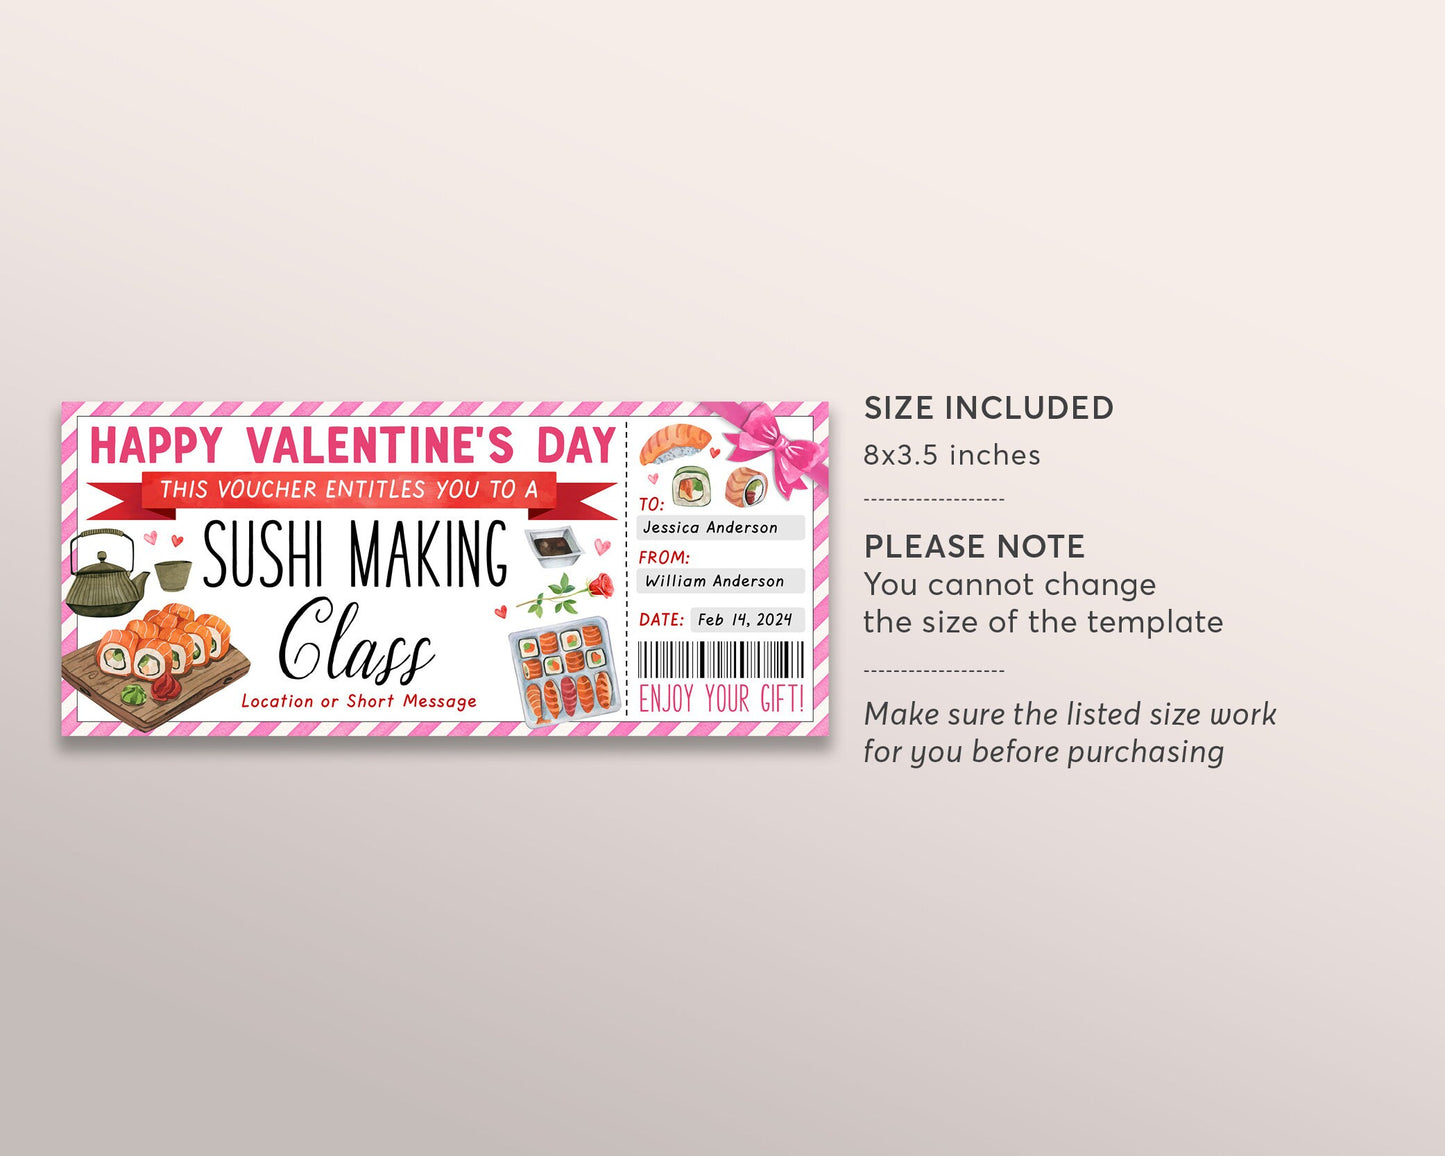 Valentines Day Sushi Making Class Ticket Voucher Editable Template, Japanese Cuisine Food Cooking Coupon, Cooking Lessons Certificate